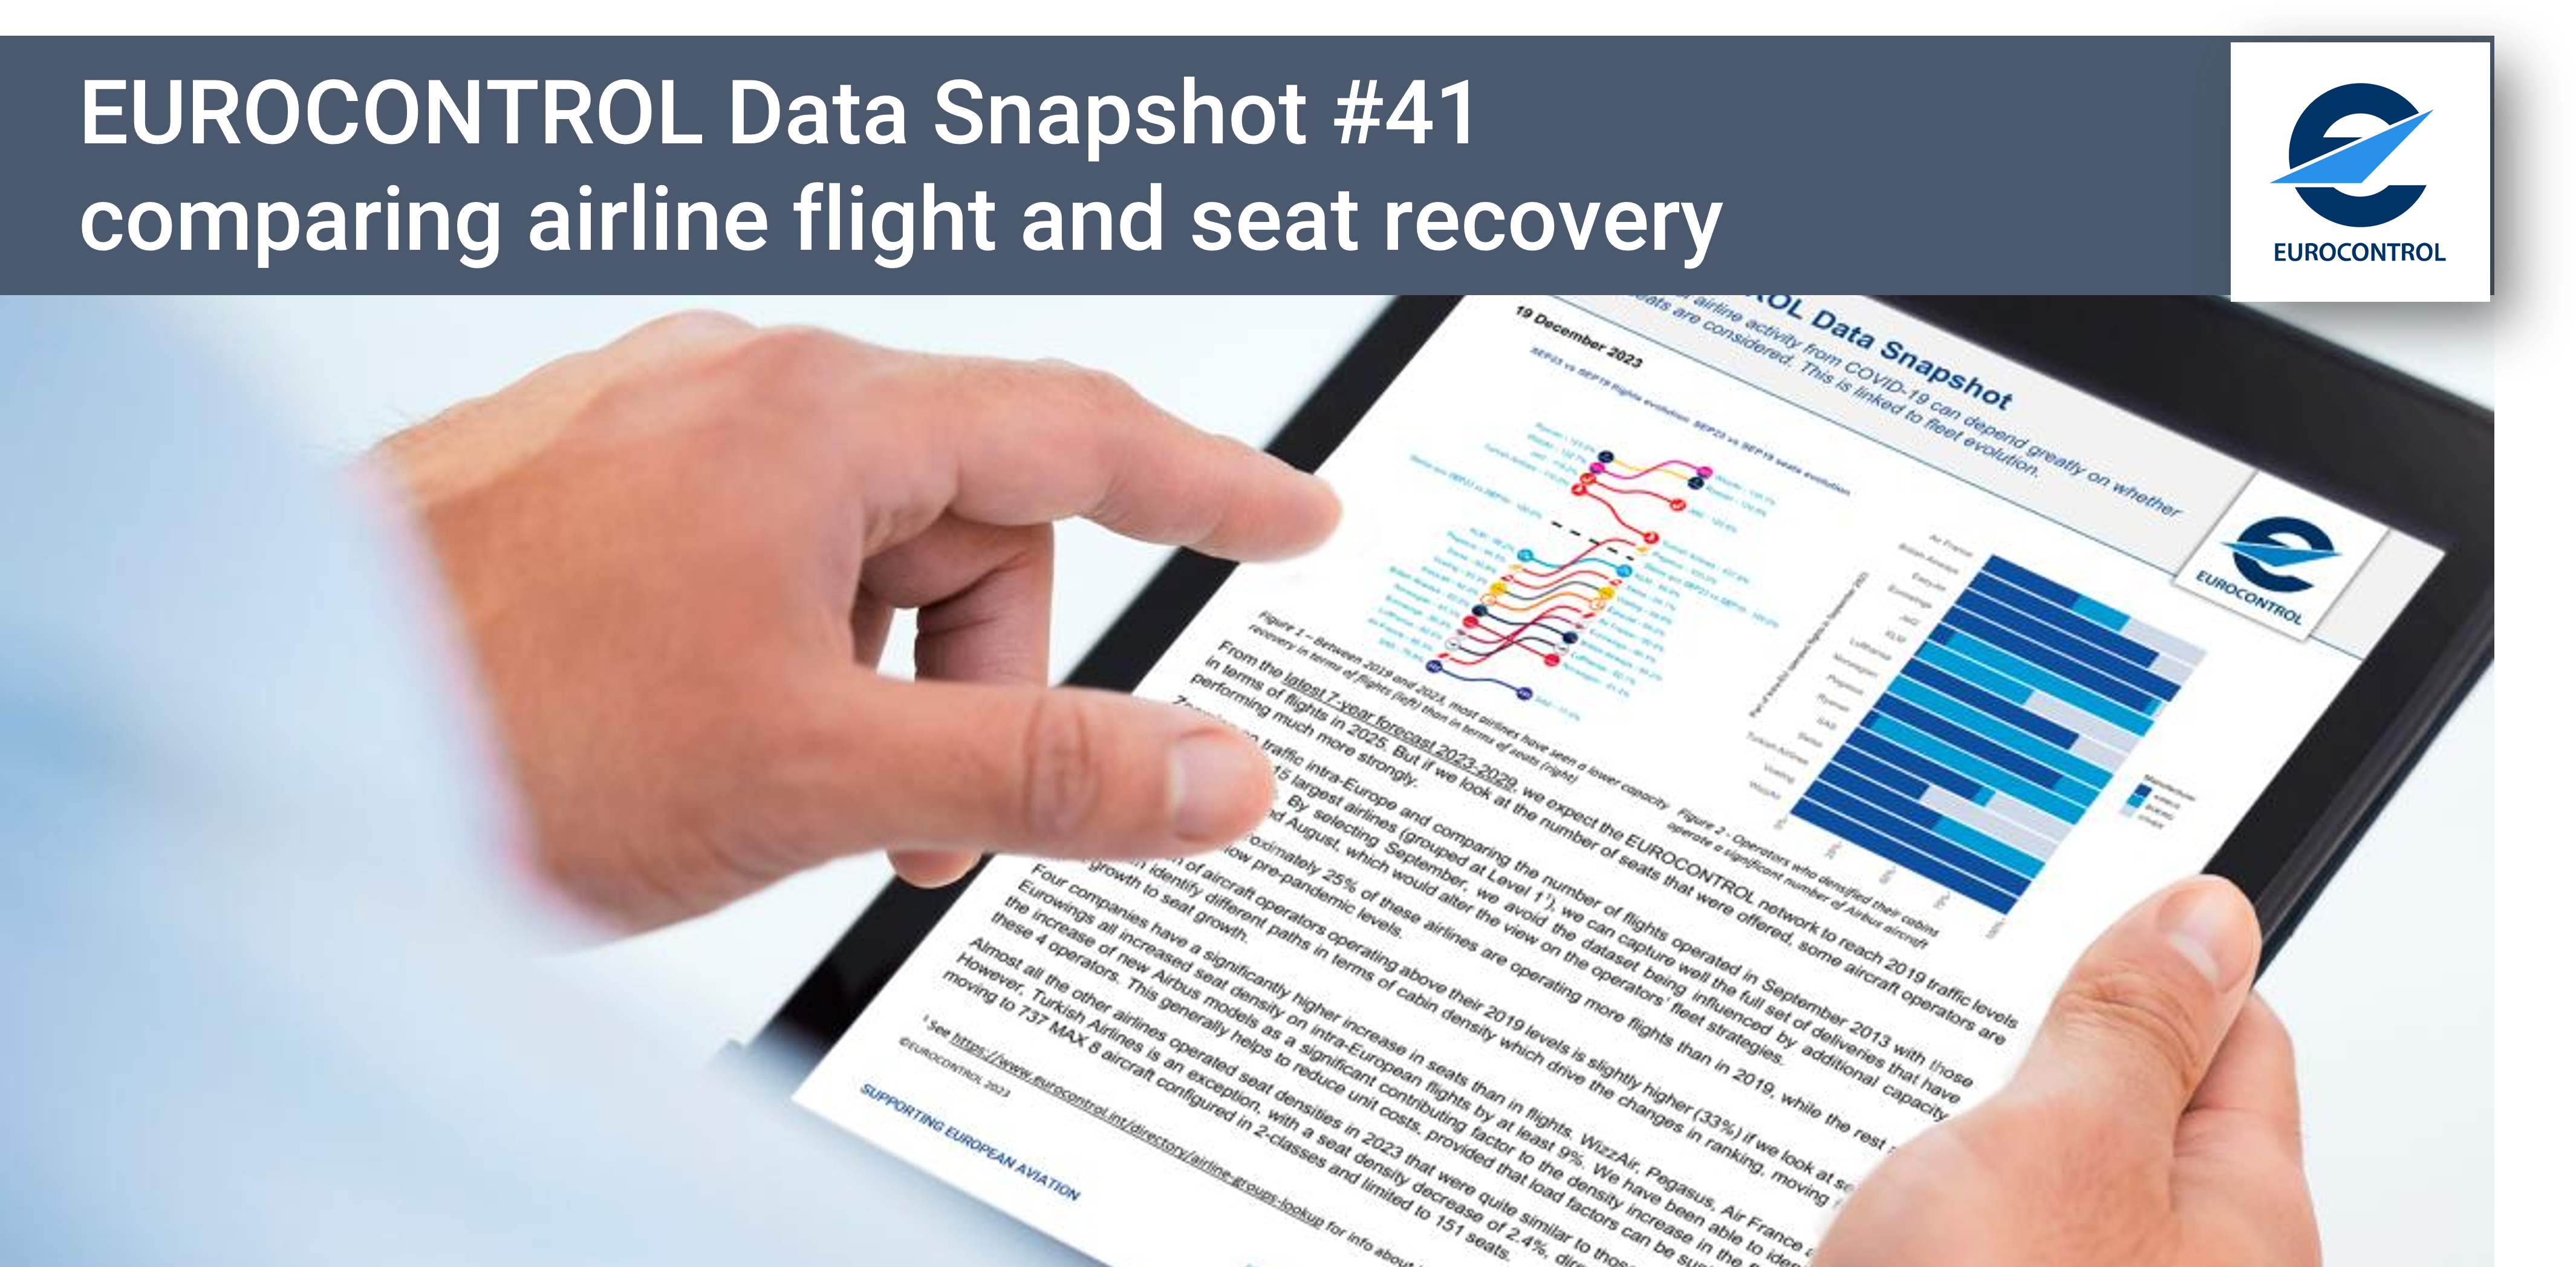 Comparing airline flight and seat recovery